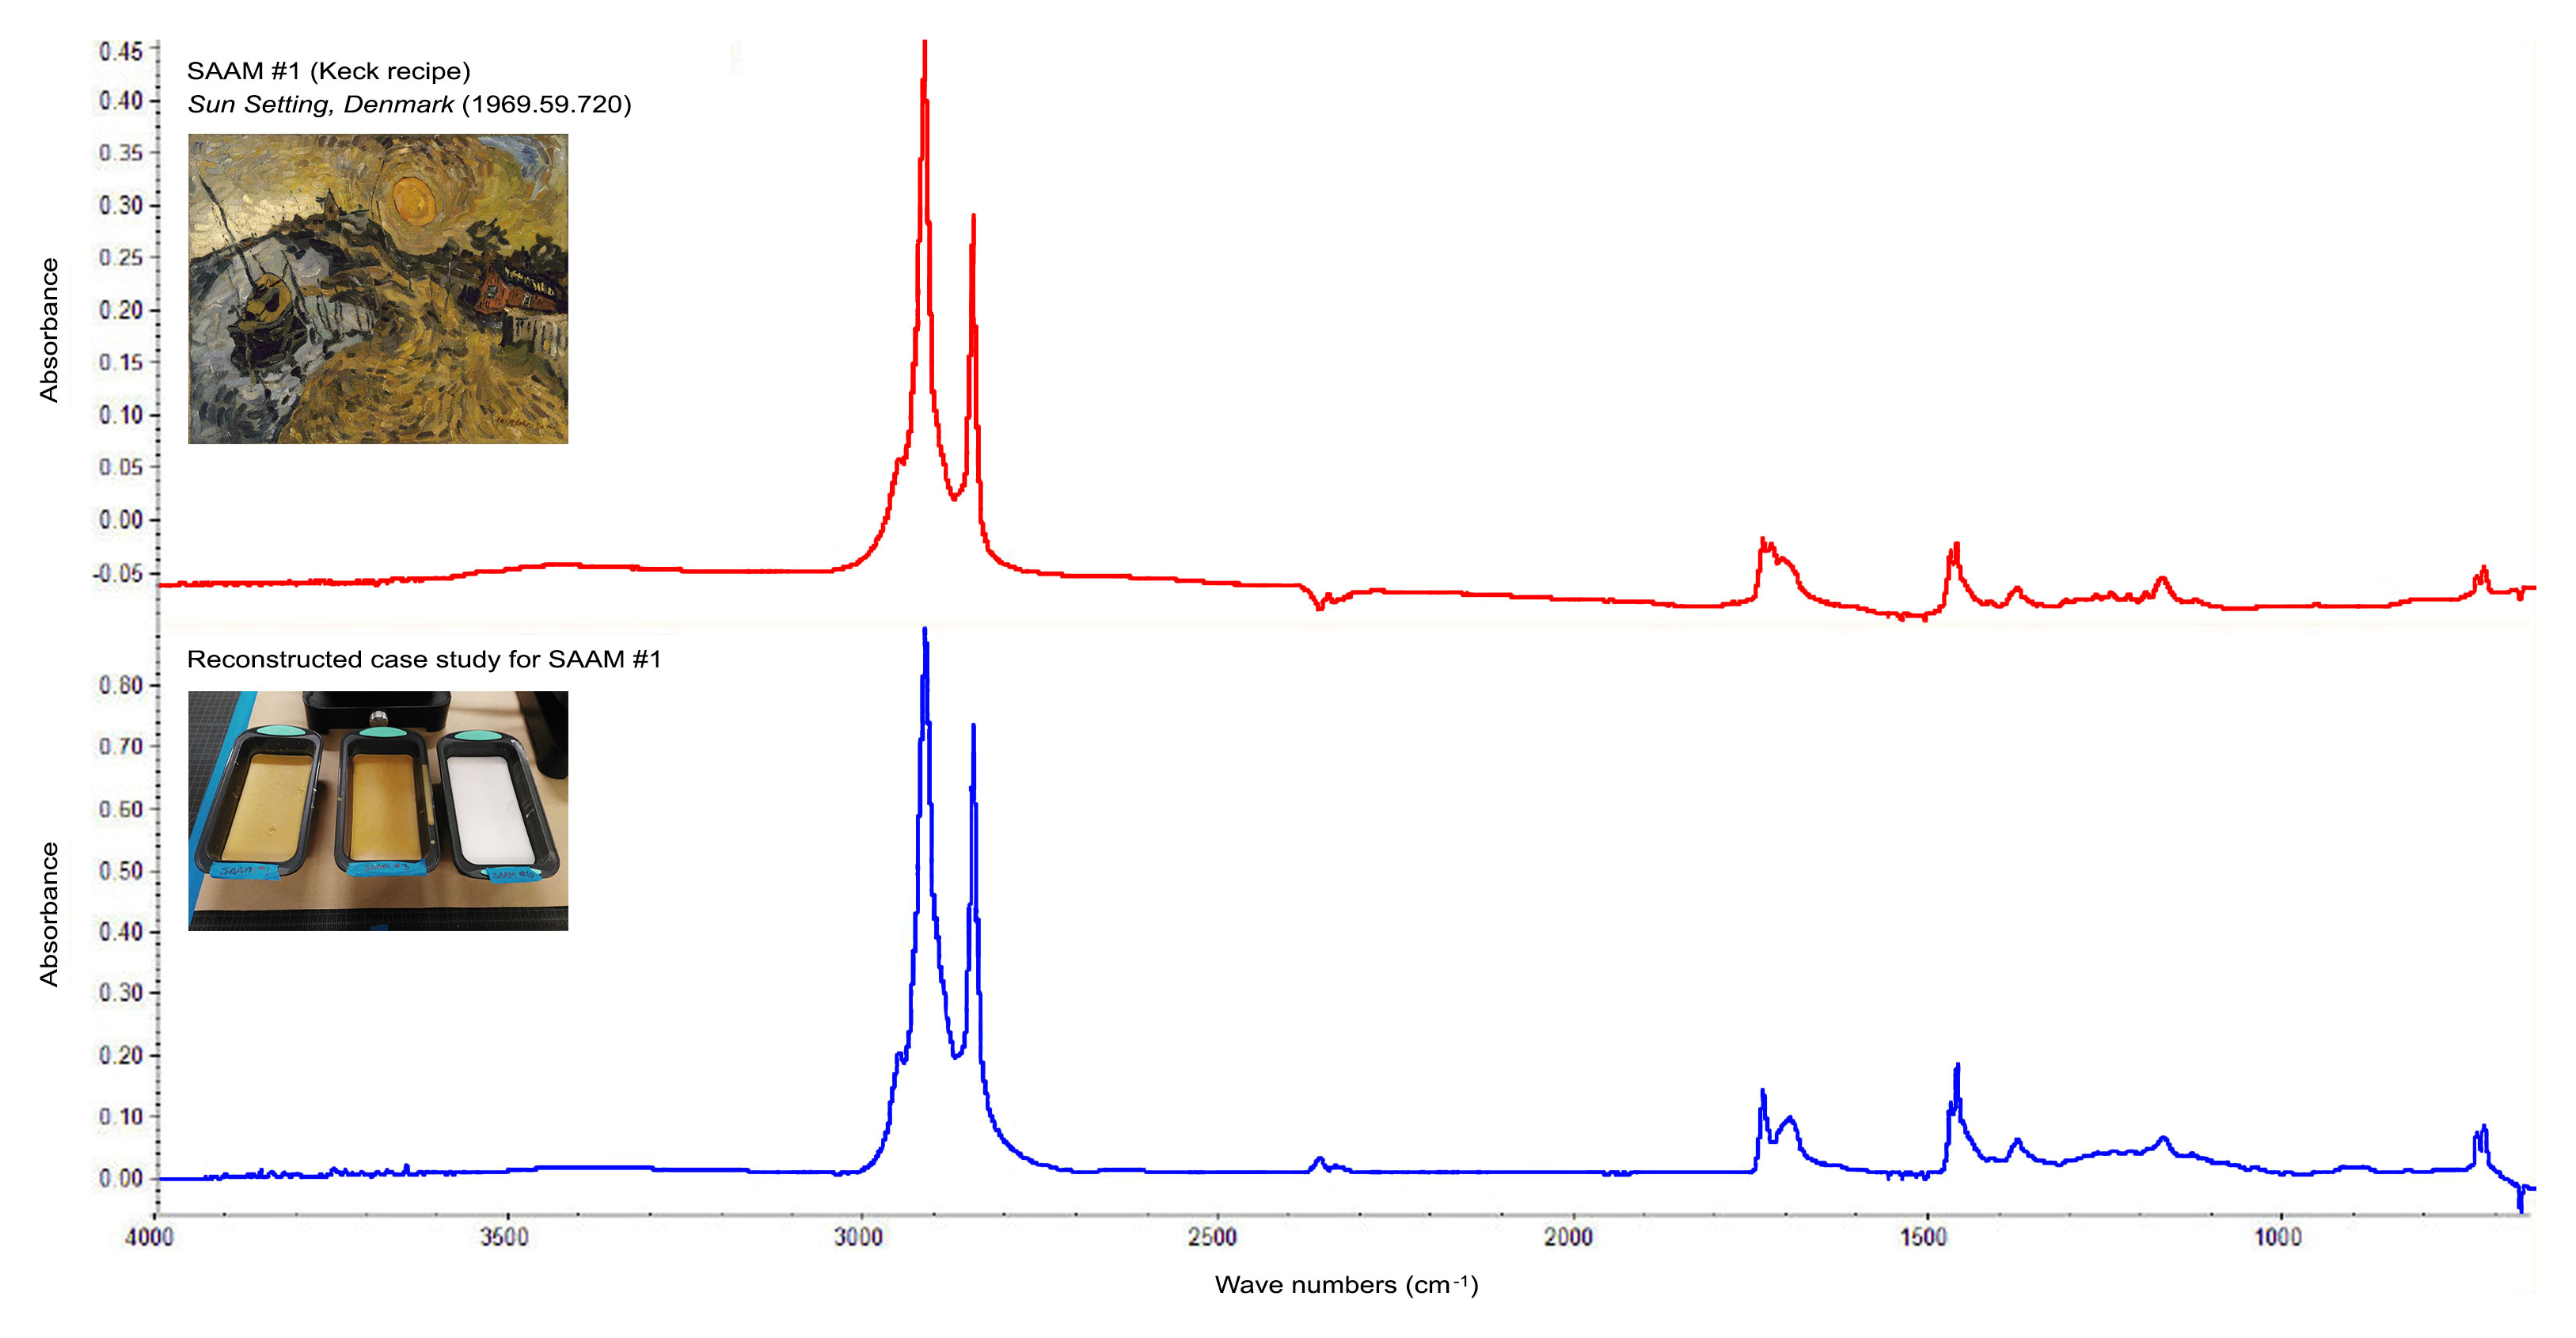 Spectral graph with two lines, red (top) and blue (bottom). Both lines peak toward the left center.